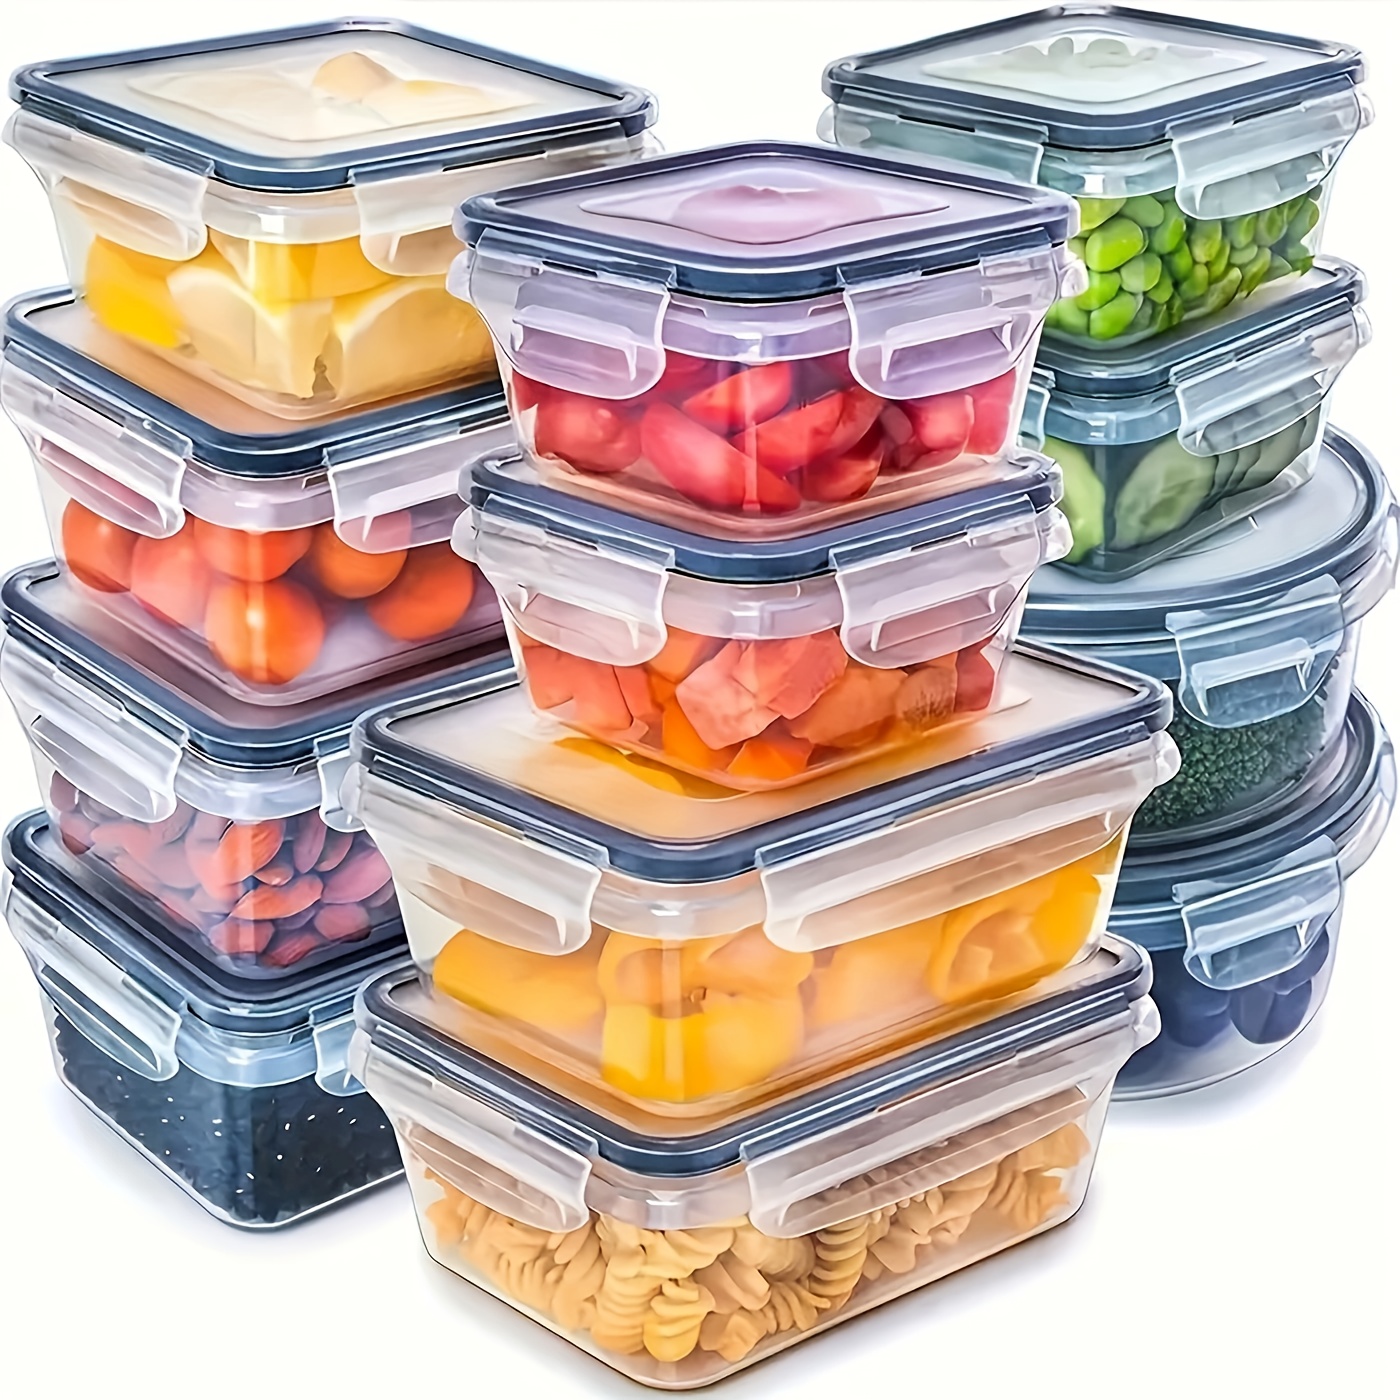 12pcs Storage Container, Food Grade Plastic Jars, Multifunctional Food Fresh-keeping Storage Box With Lid, For Dumpling, Meat, Eggs, Ginger, Garlic And Green Onion, Kitchen Organizers And Storage, Kitchen Accessories